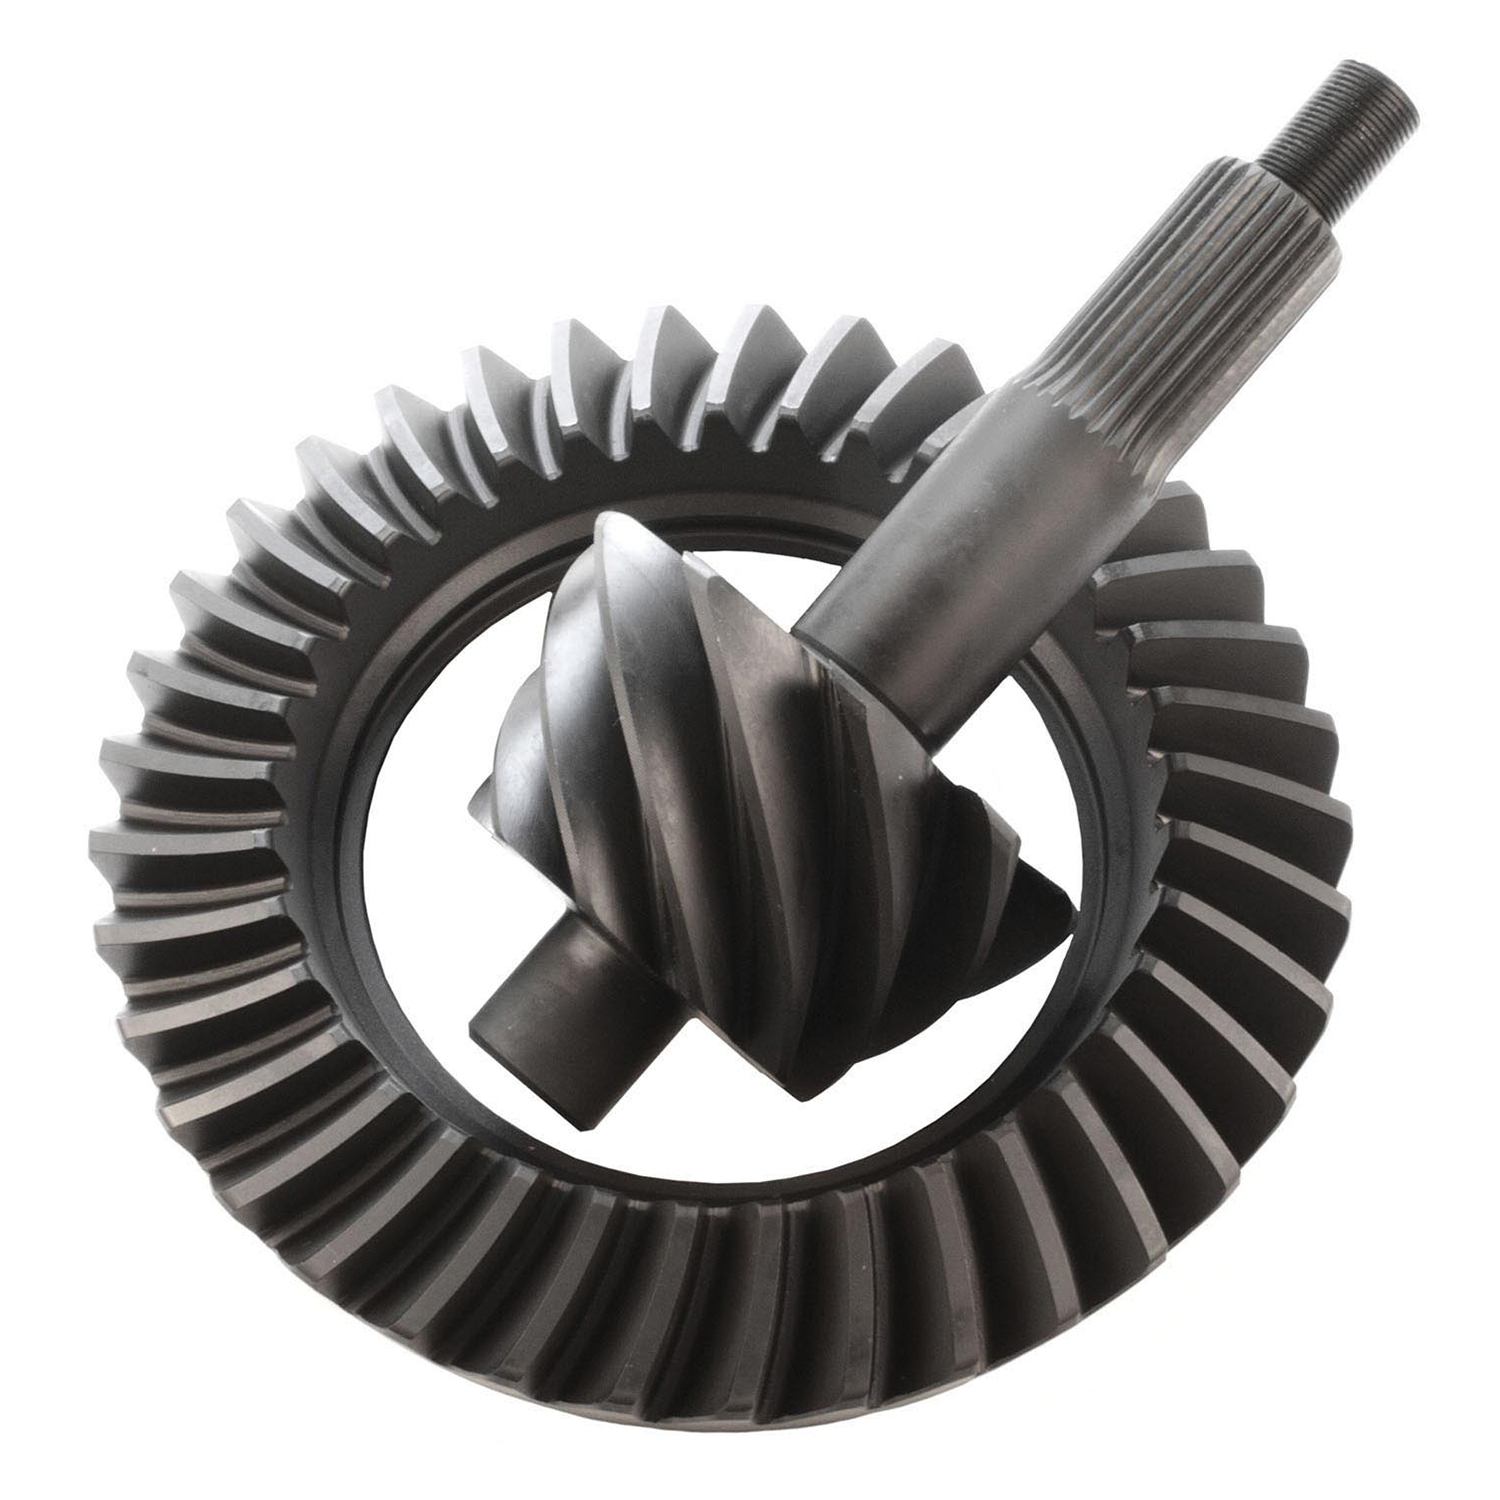 Richmond Gear F9514 - Ring and Pinion, Excel, 5.14 Ratio, 28 Spline Pinion, Ford 9 in, Kit